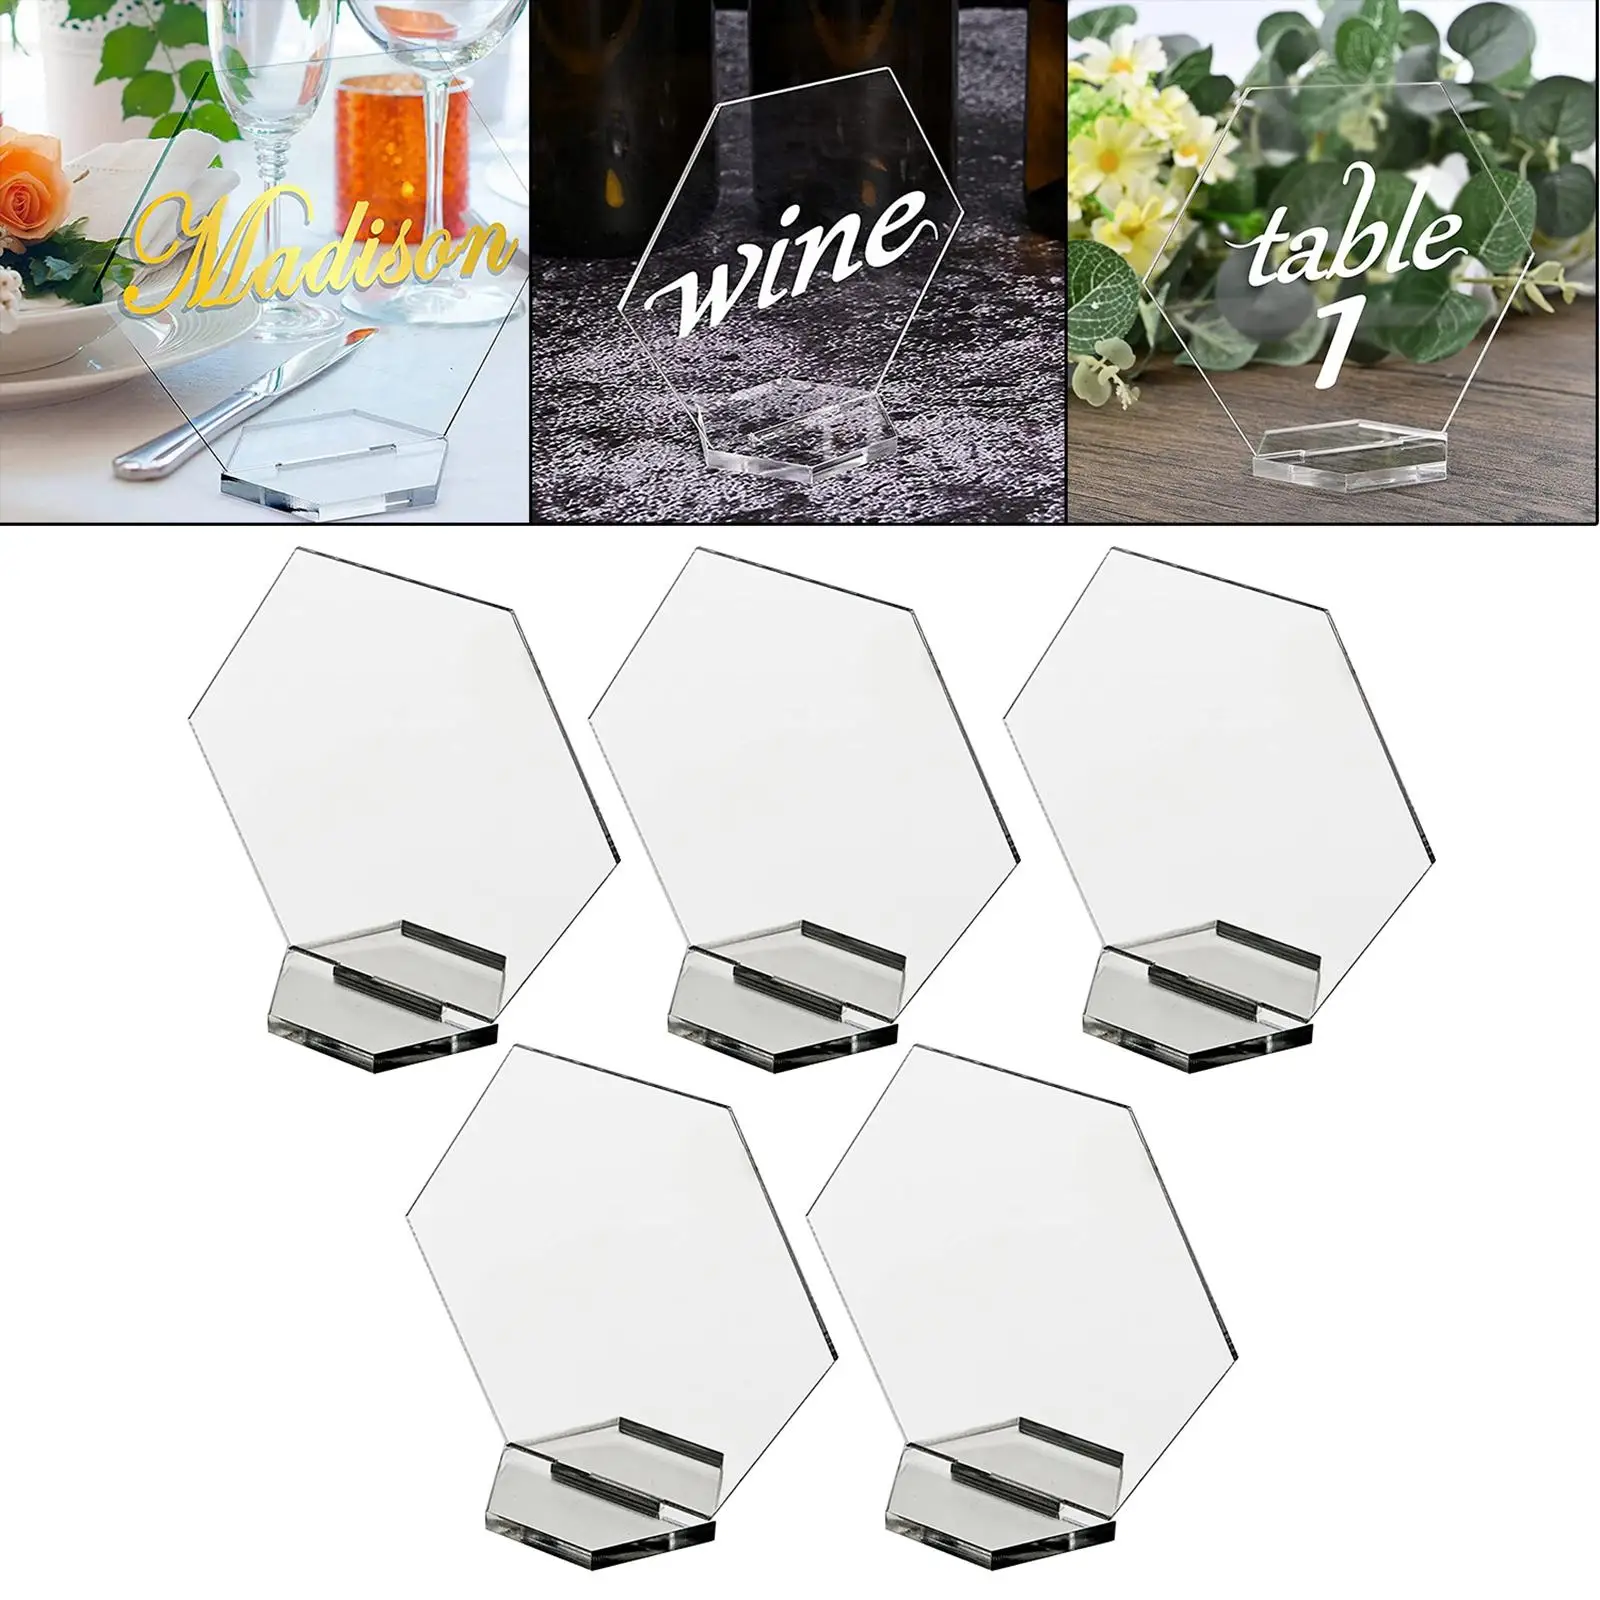 5 Pieces Clear Place Card for Table Hexagon Acrylic Place Card Sign Blanks Guest Names Card for Wedding Birthday Party Decor